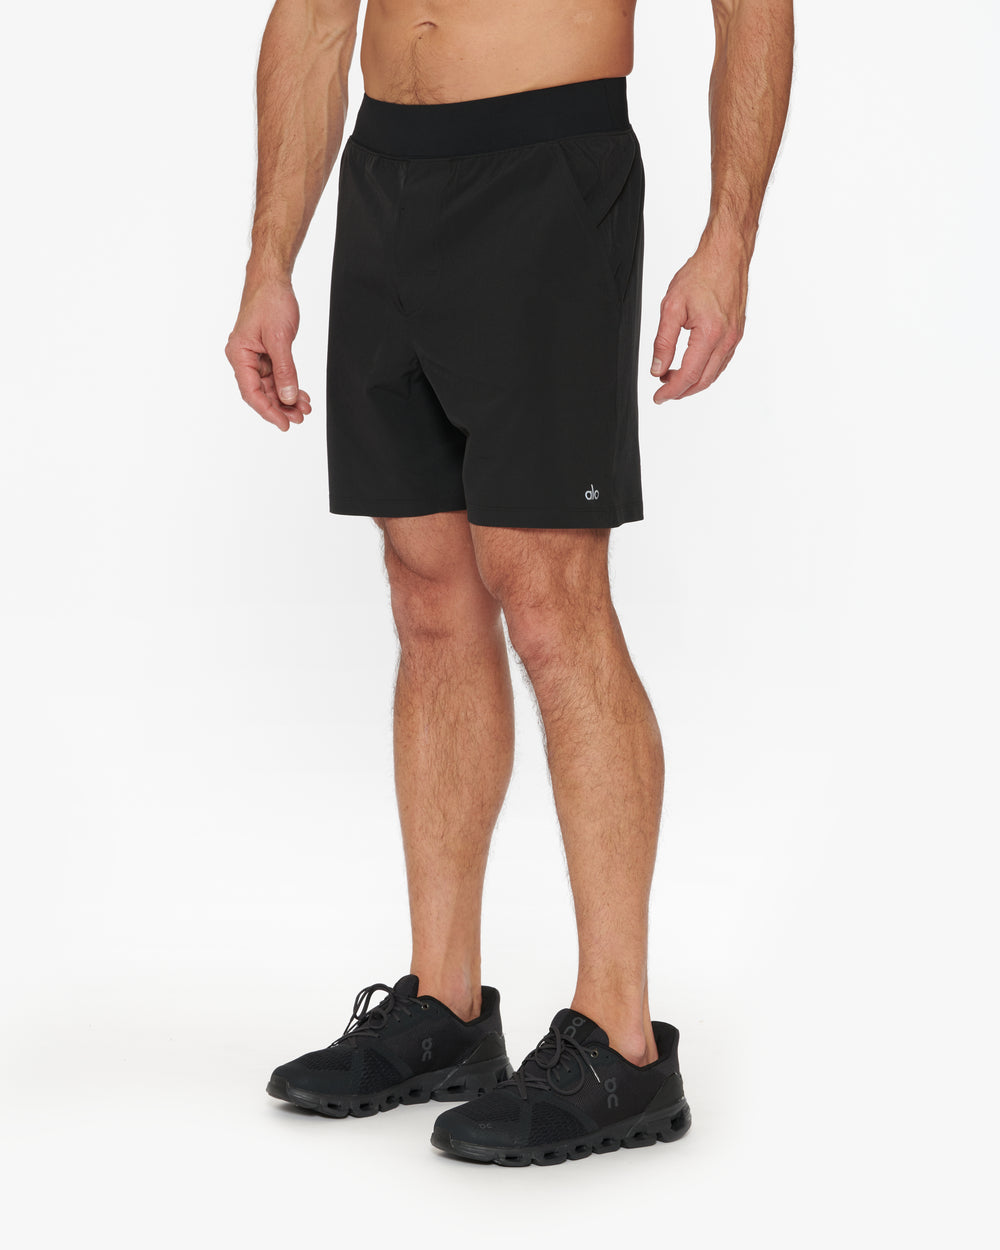 Alo haul- repetition shorts in Anthracite, revitalize pants in